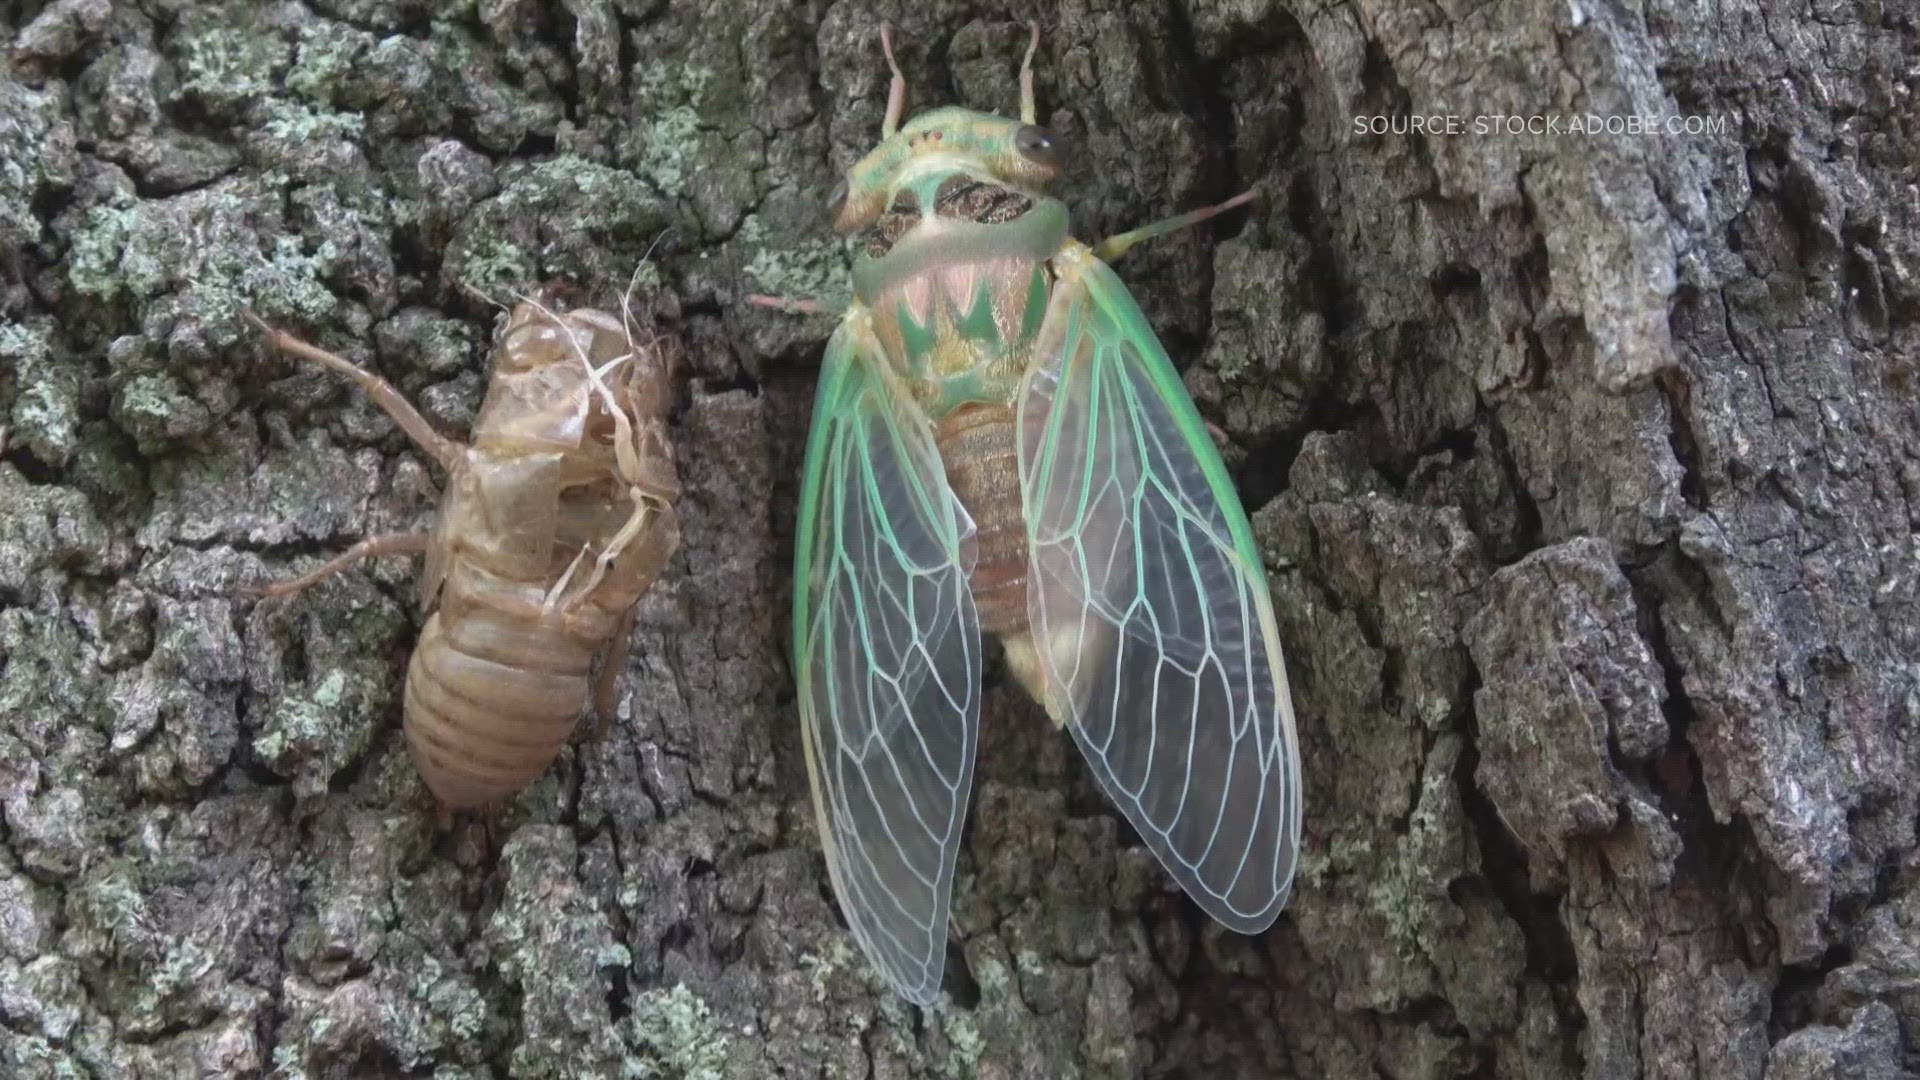 Cicadas in the ground for 13 and 17 years will emerge this year.